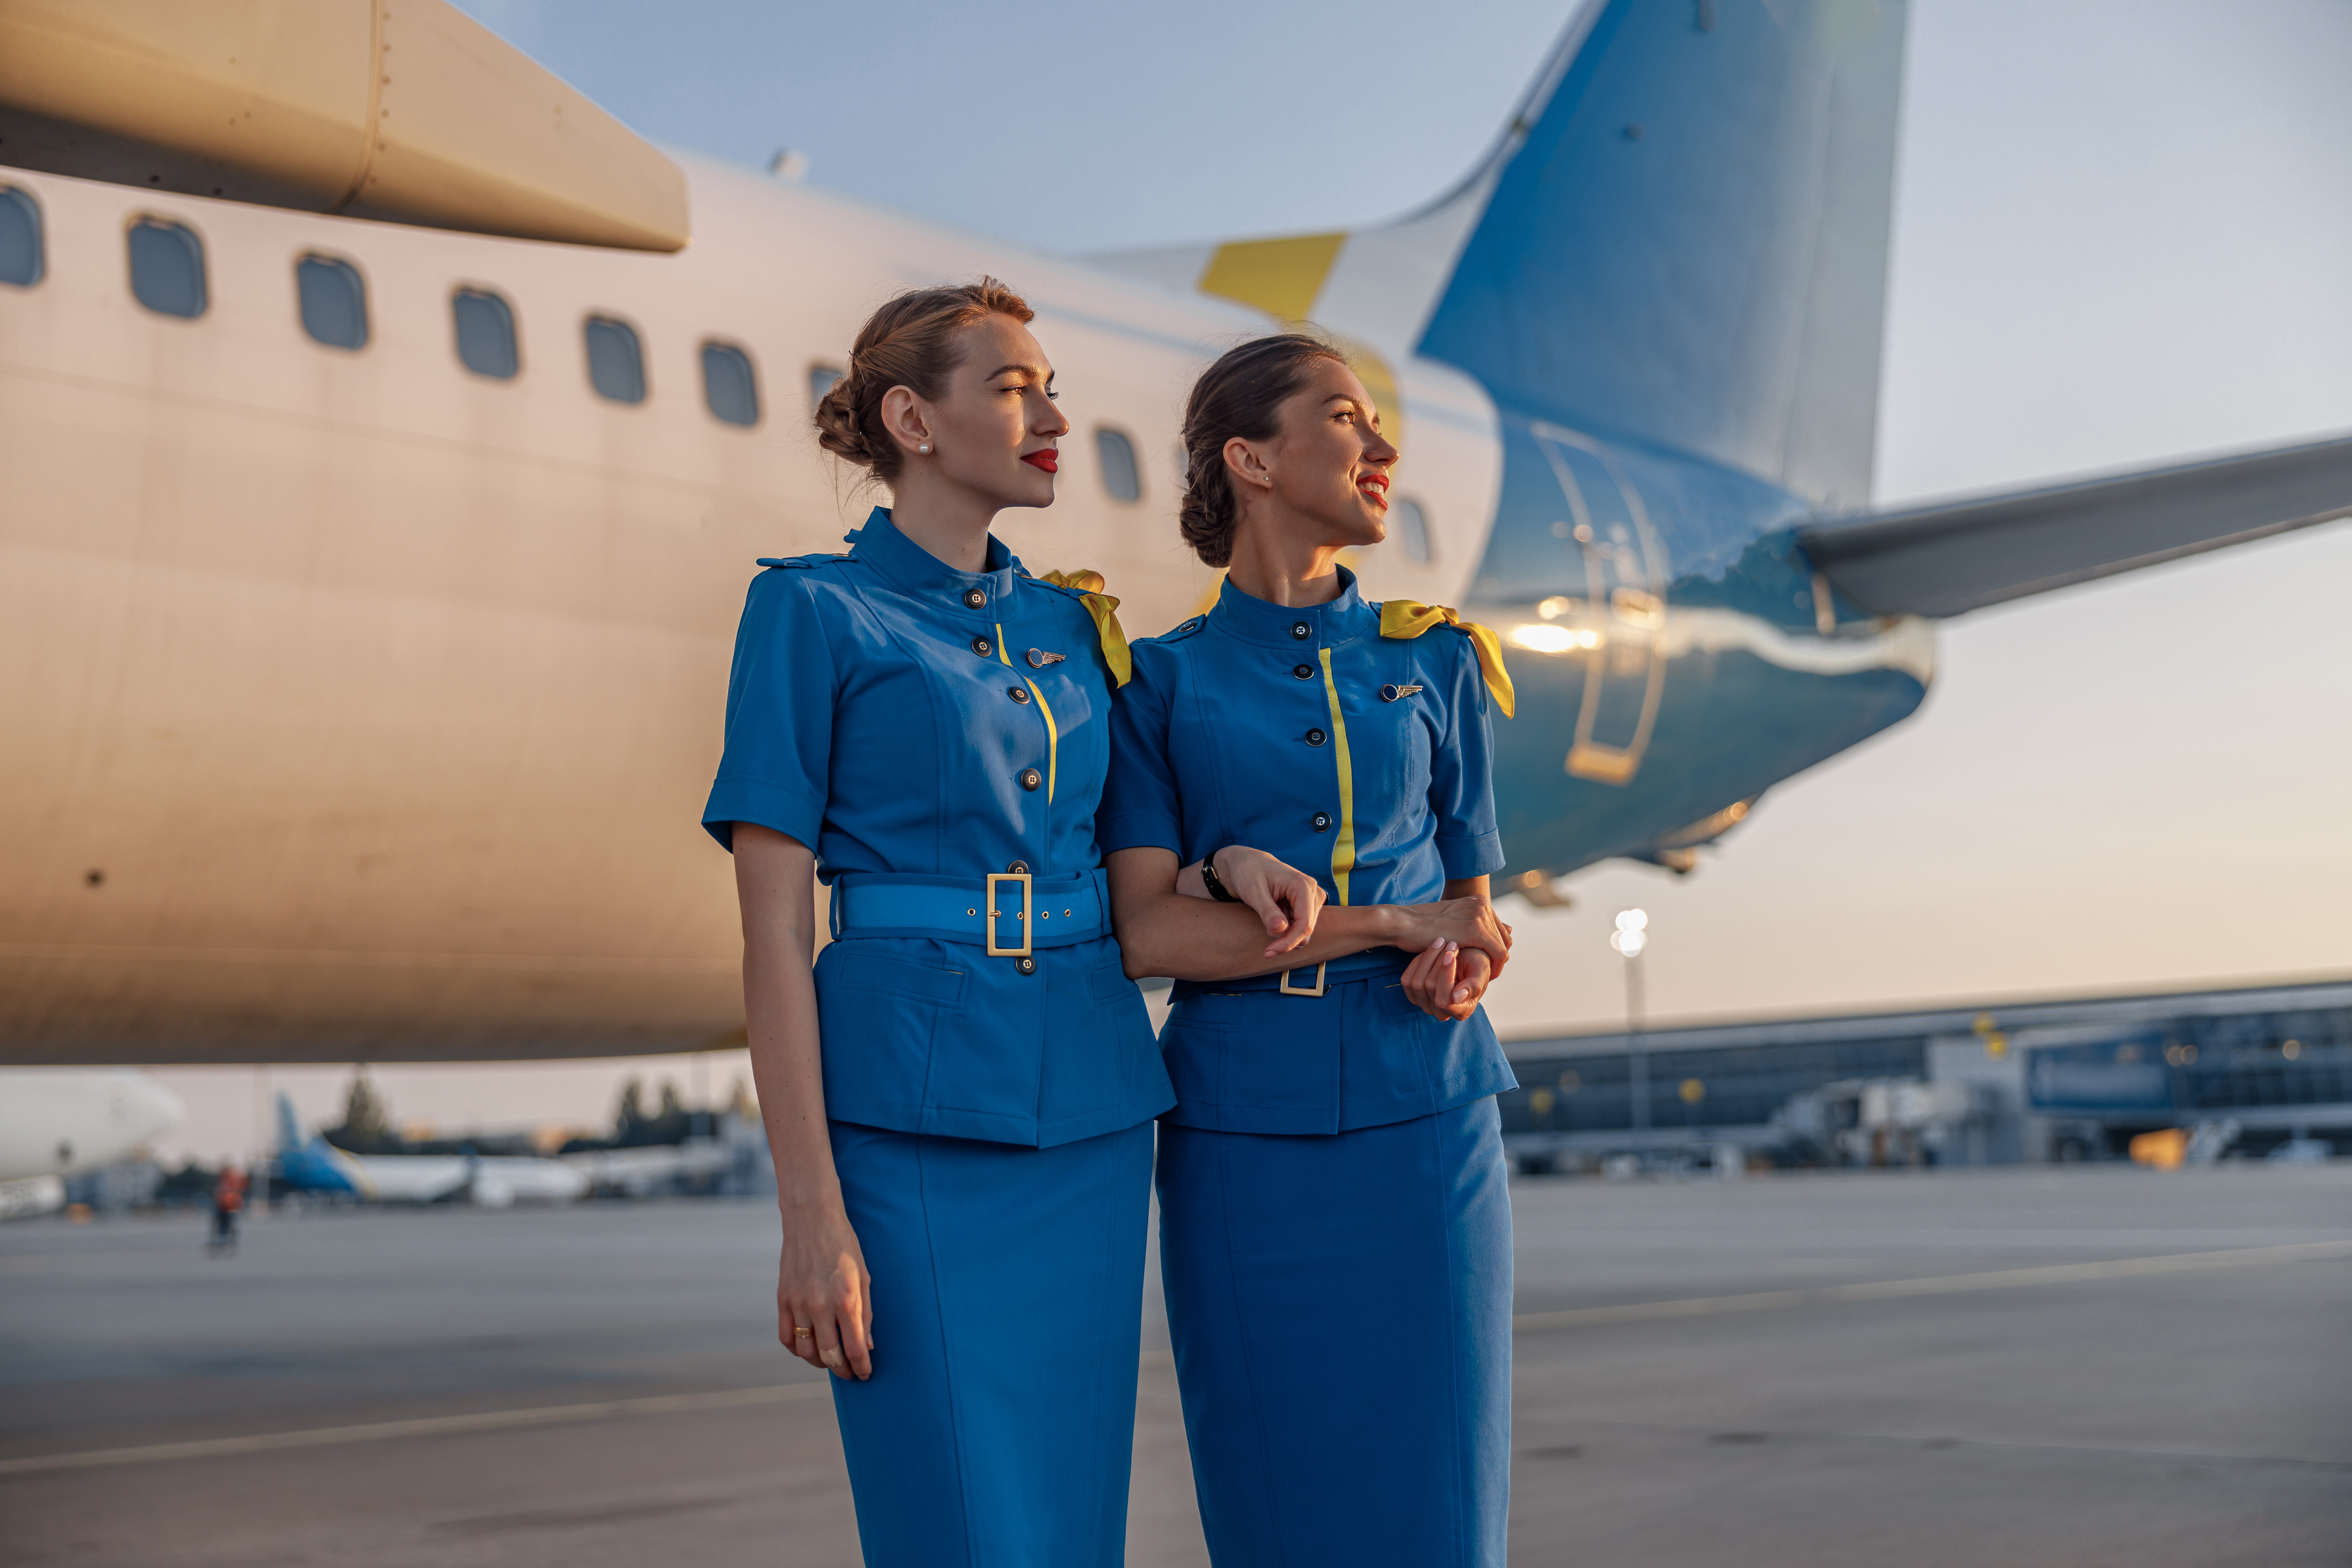 Two beautiful air hostesses in blue uniform smiling away, standing in front of a big passenger airplane in airport at sunset. | Source: Shutterstock